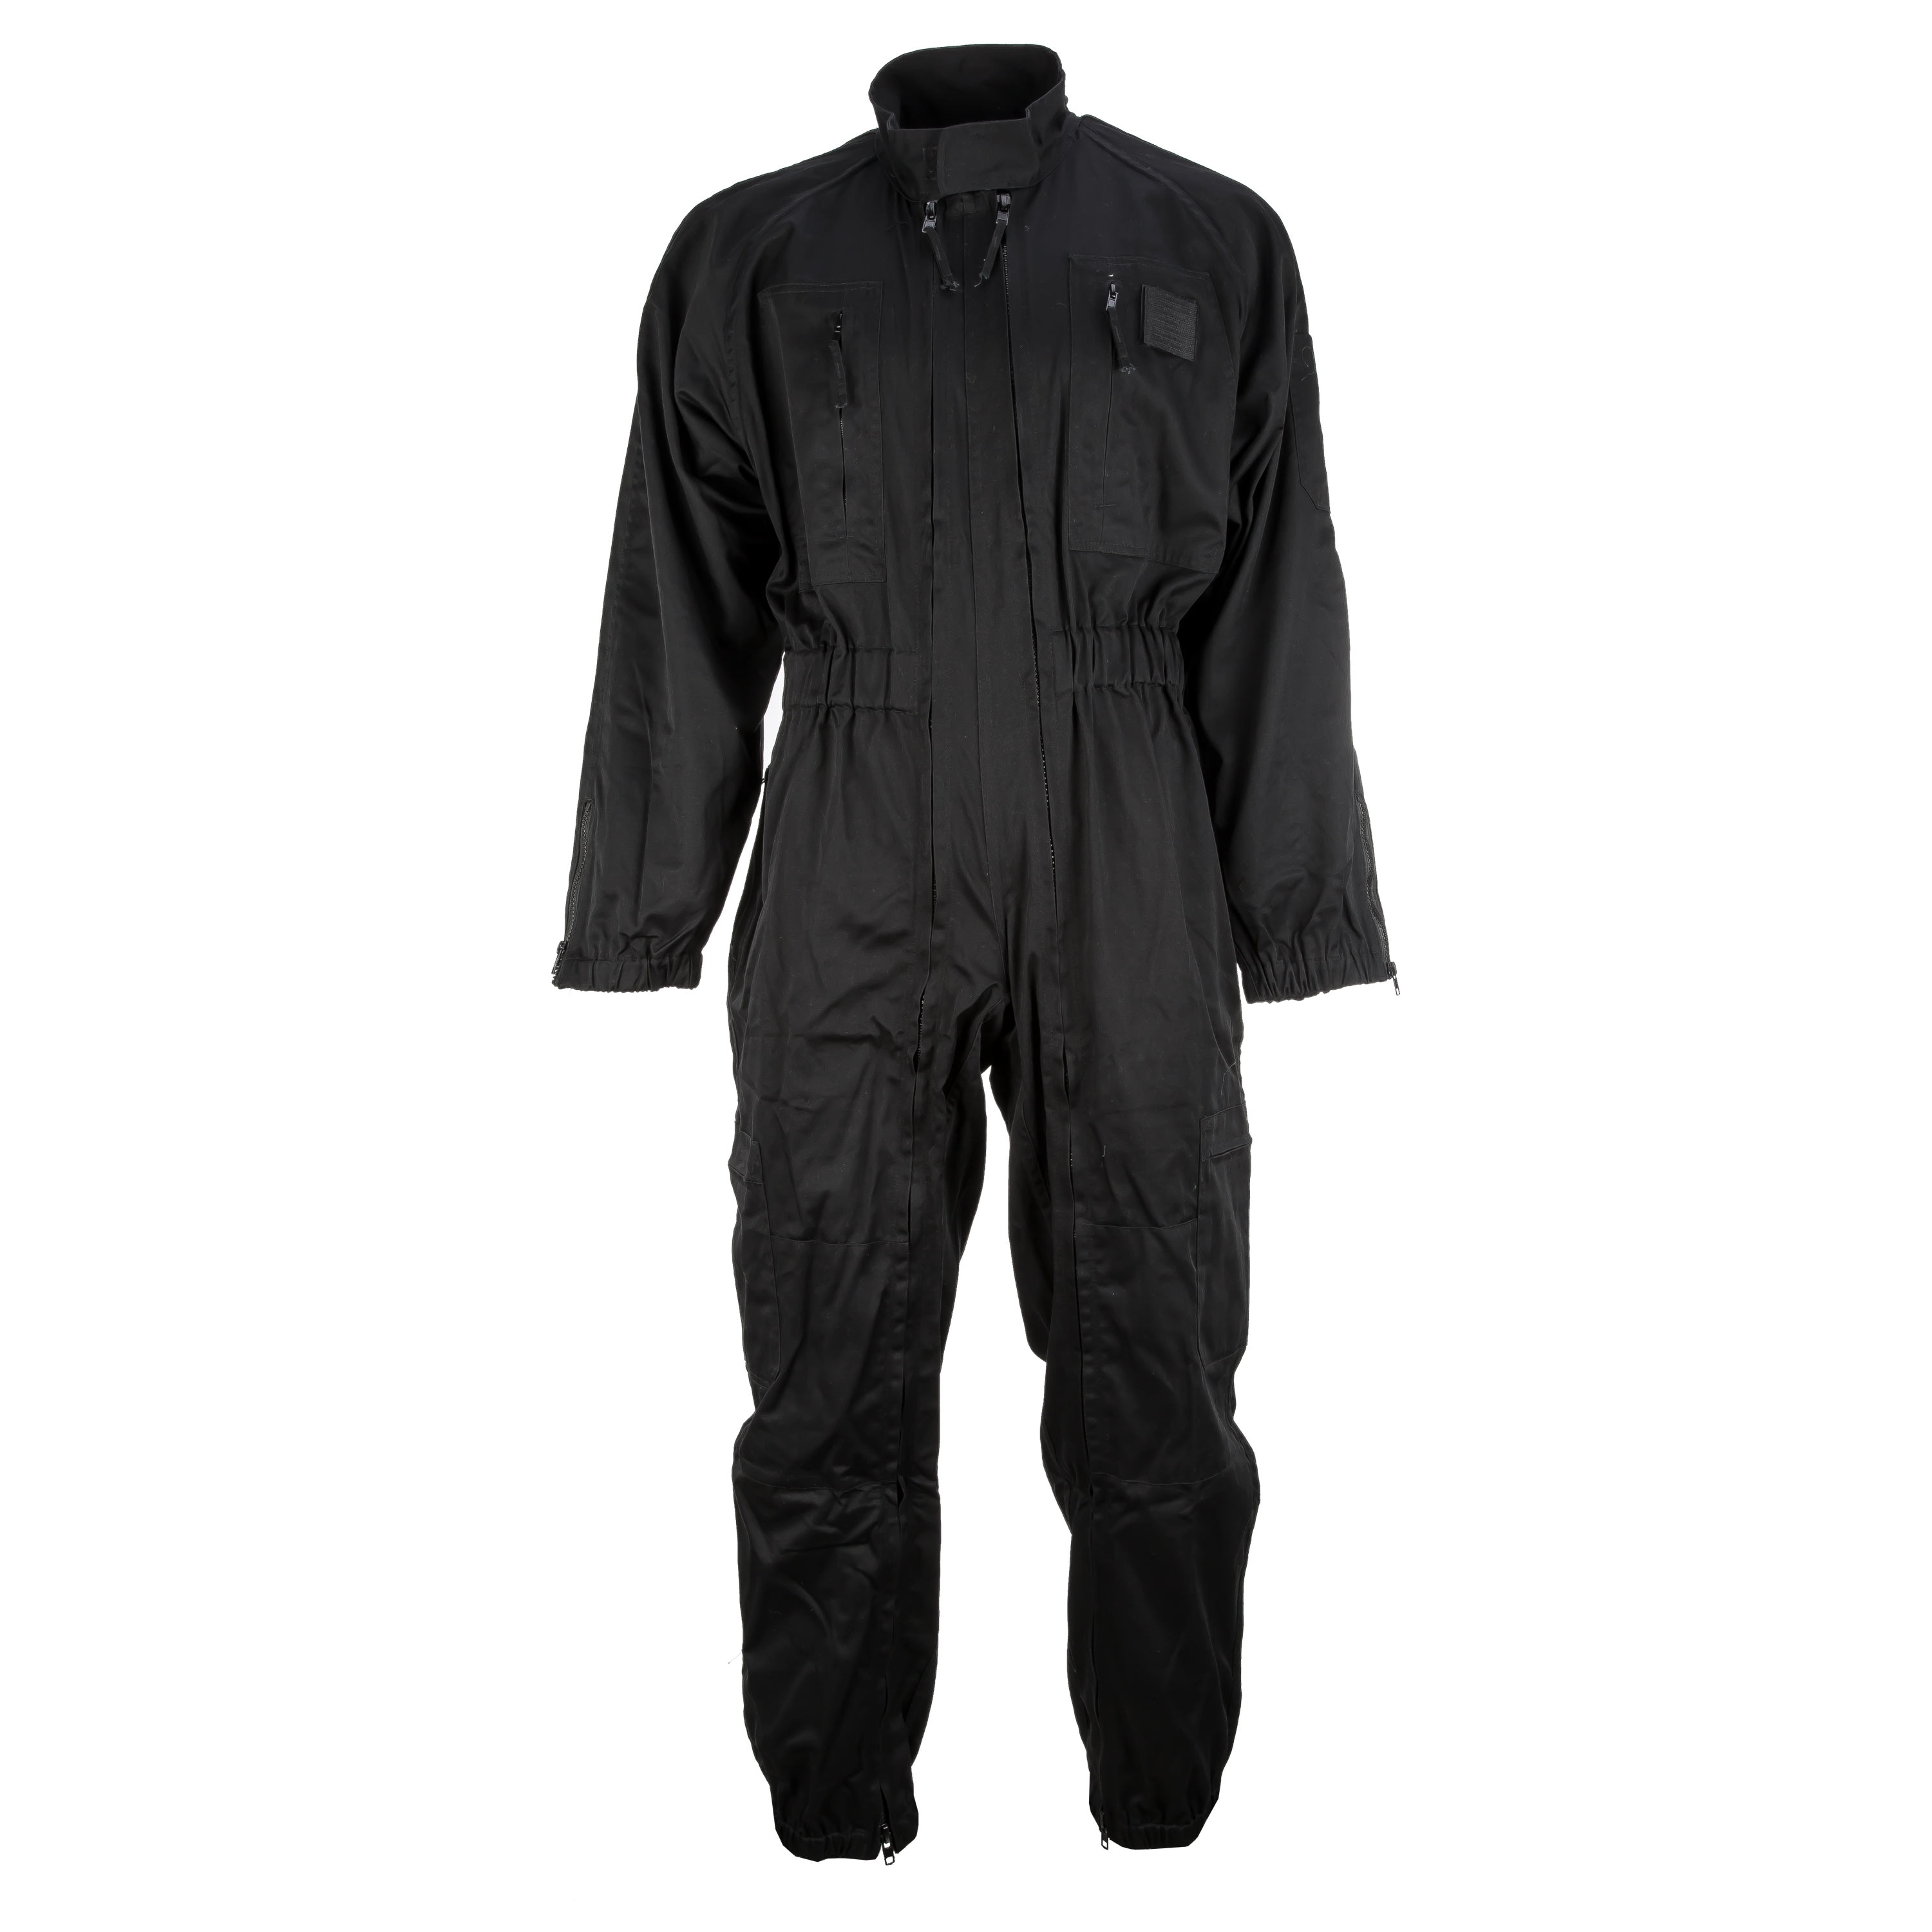 Purchase The Swat Coverall Black By Asmc